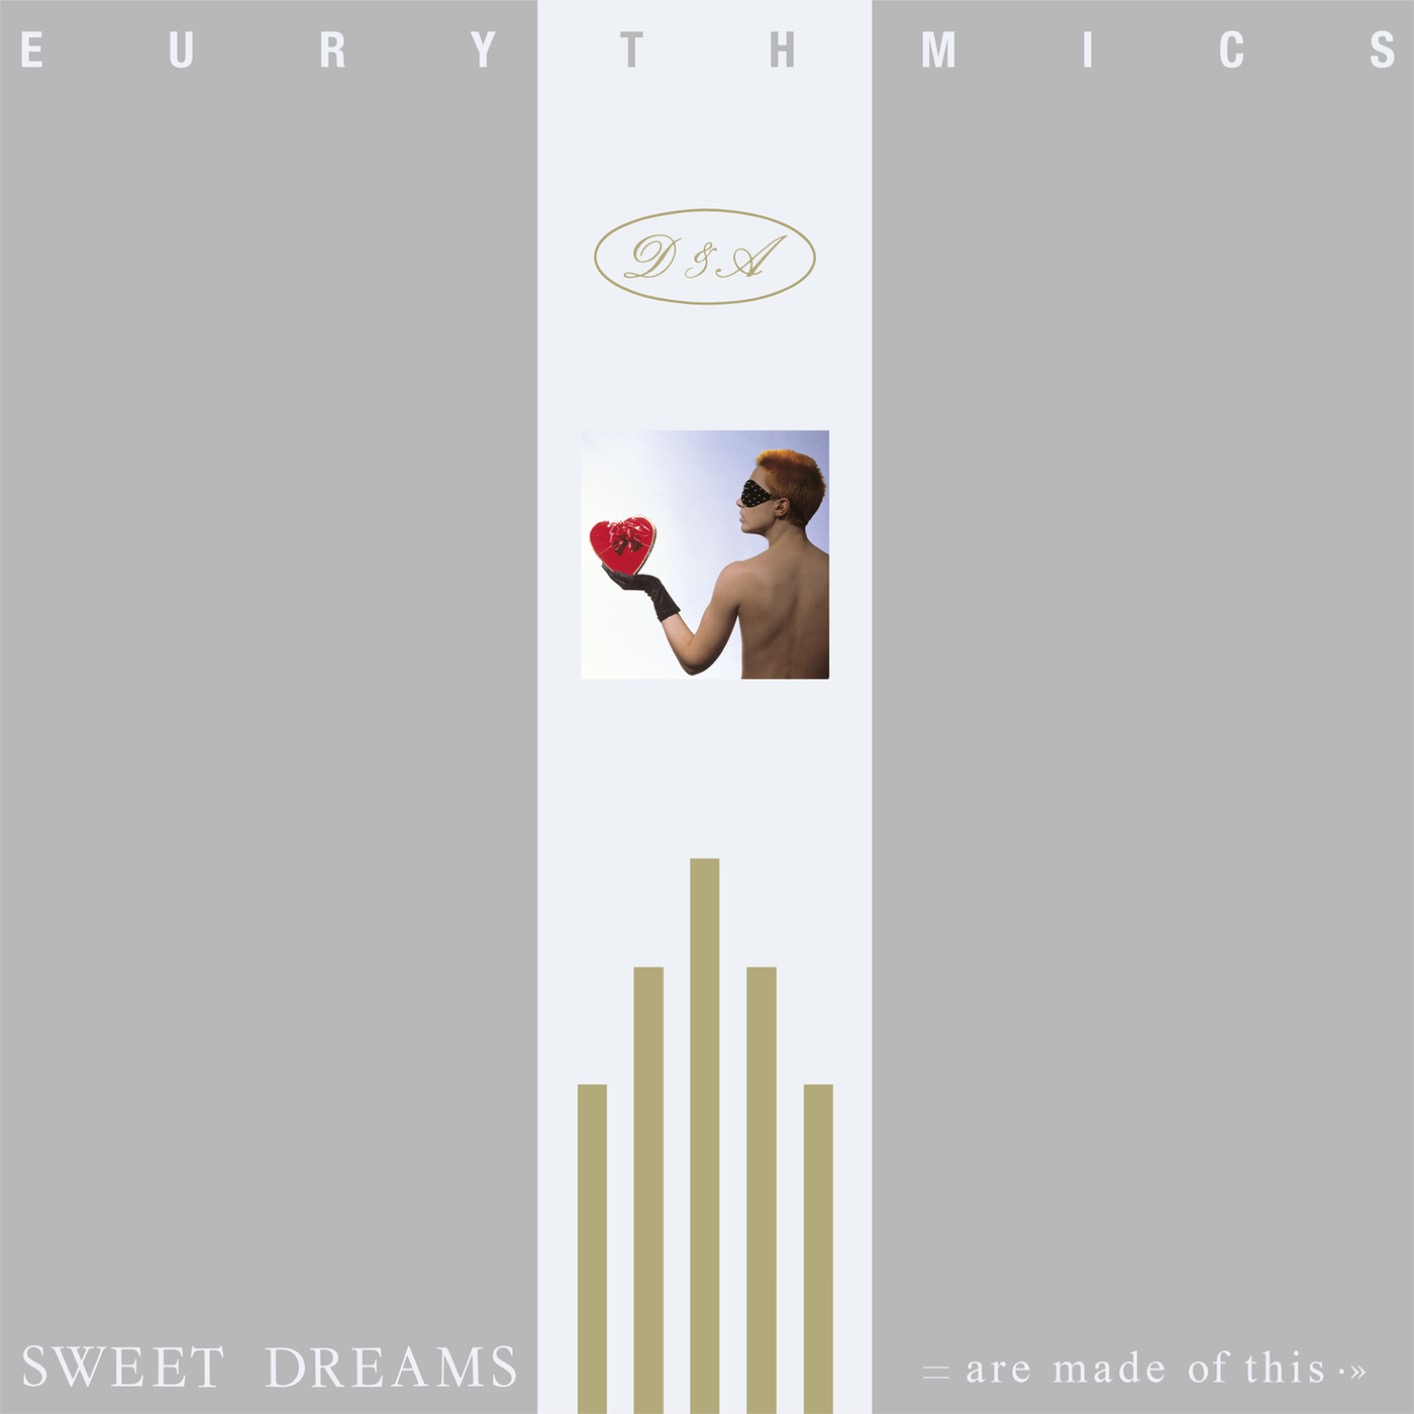 Eurythmics - Sweet Dreams (Are Made of This) (1984/2018) [FLAC 24bit/96kHz]